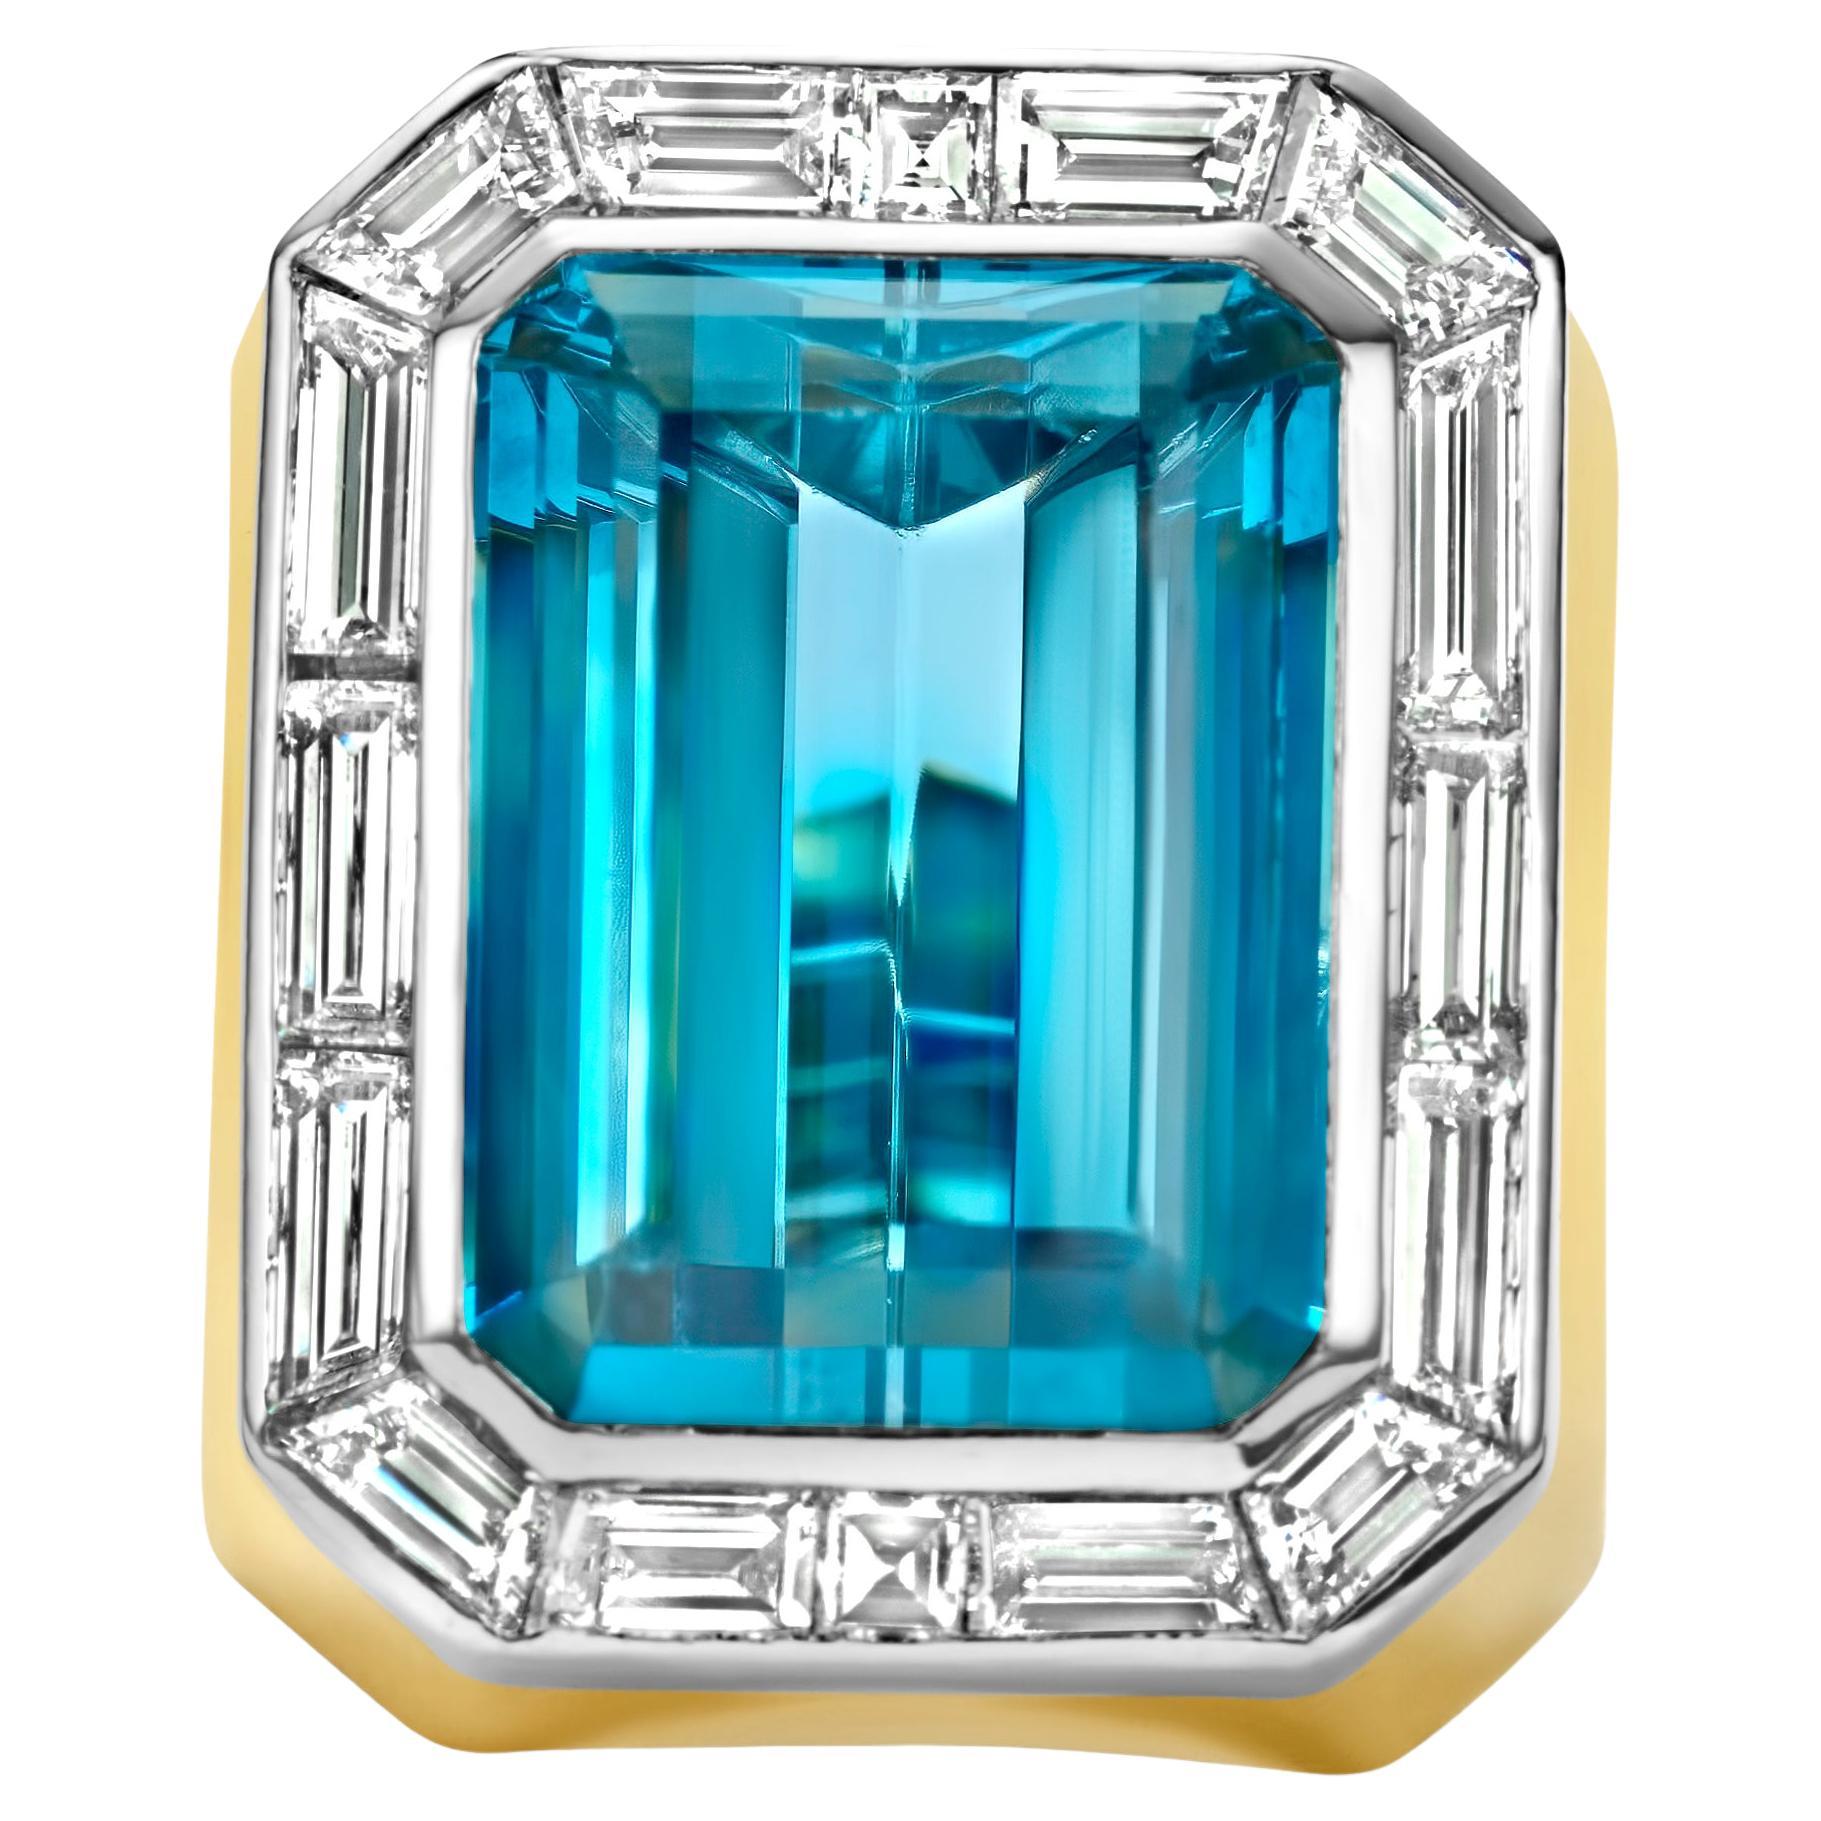 Gorgeous 18kt Gold Ring with massive 15.6 ct. Natural Santa Maria Aquamarine & Diamonds from Estate of His Majesty the Sultan of oman Qaboos Bin Said

Aquamarine: 15.6 ct. Natural blue aquamarine, Step cut, Octagonal shape with no indications of